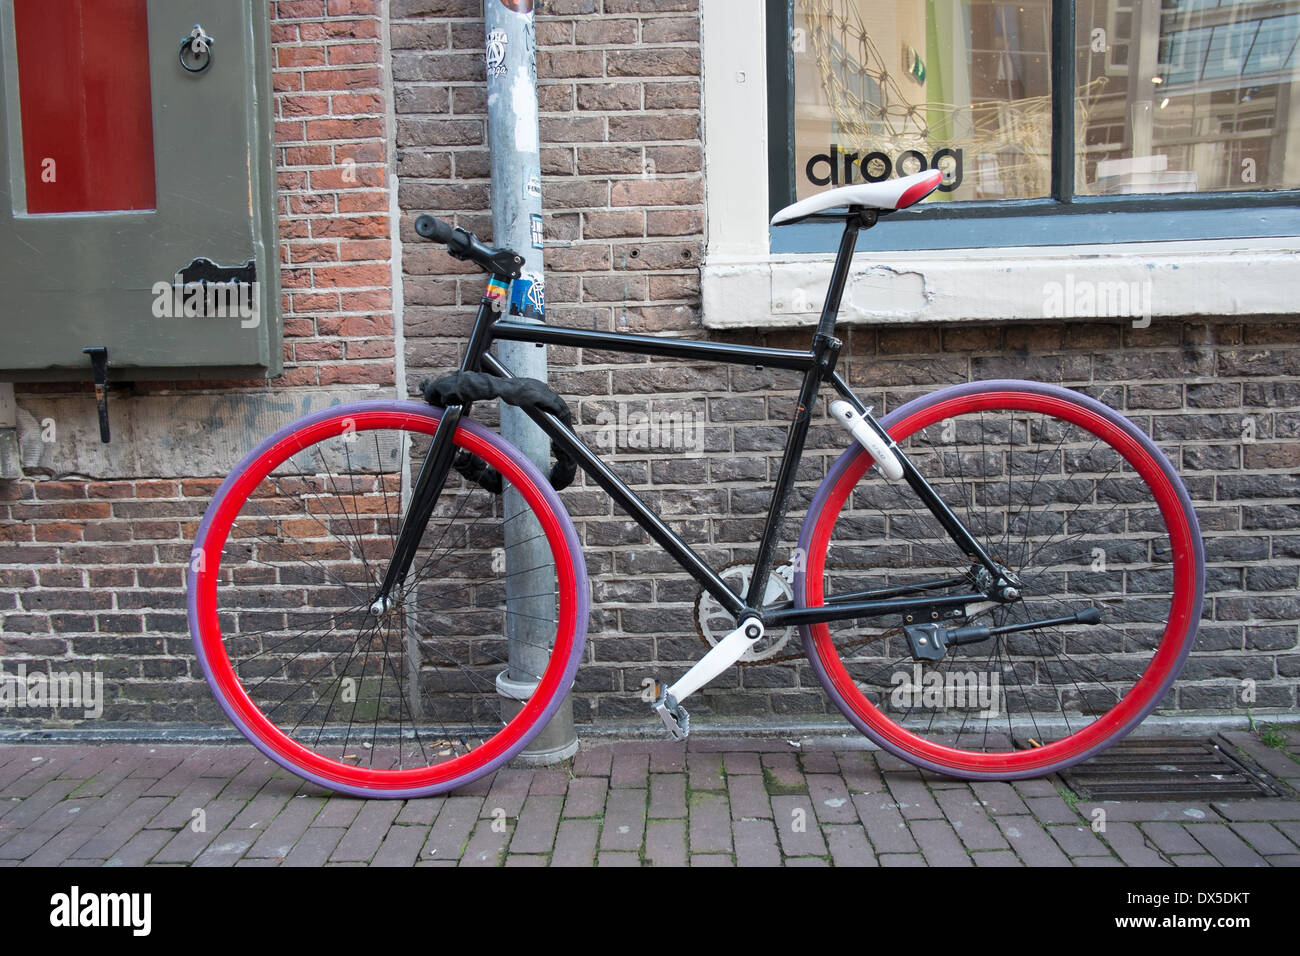 bicycle with black frame red wheels and purple tyres amsterdam netherlands Stock Photo